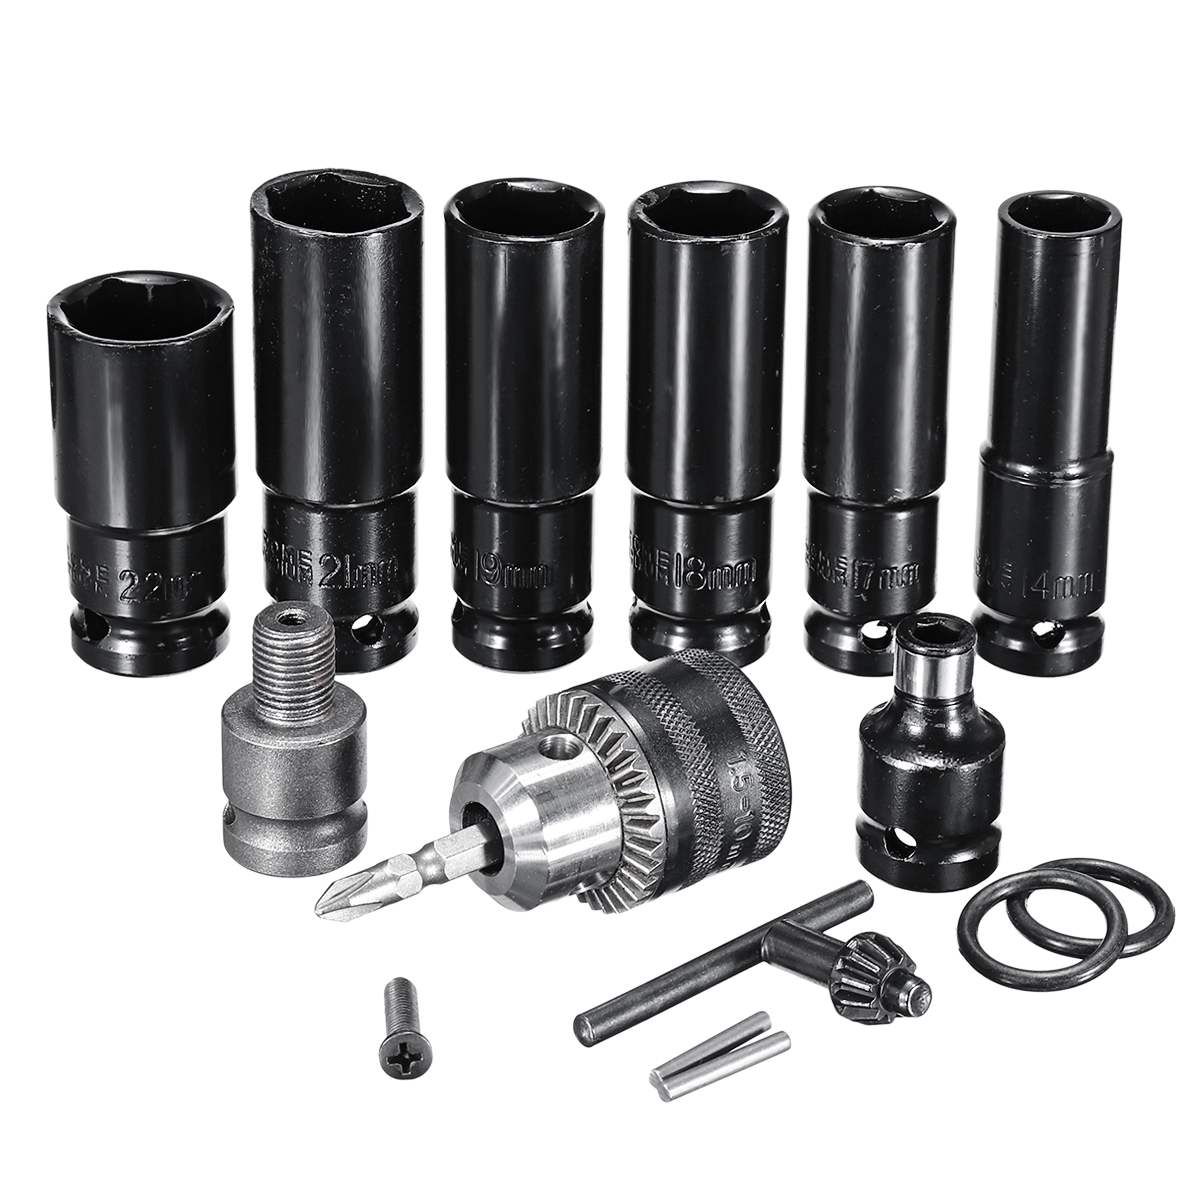 Impact Wrench Accessories